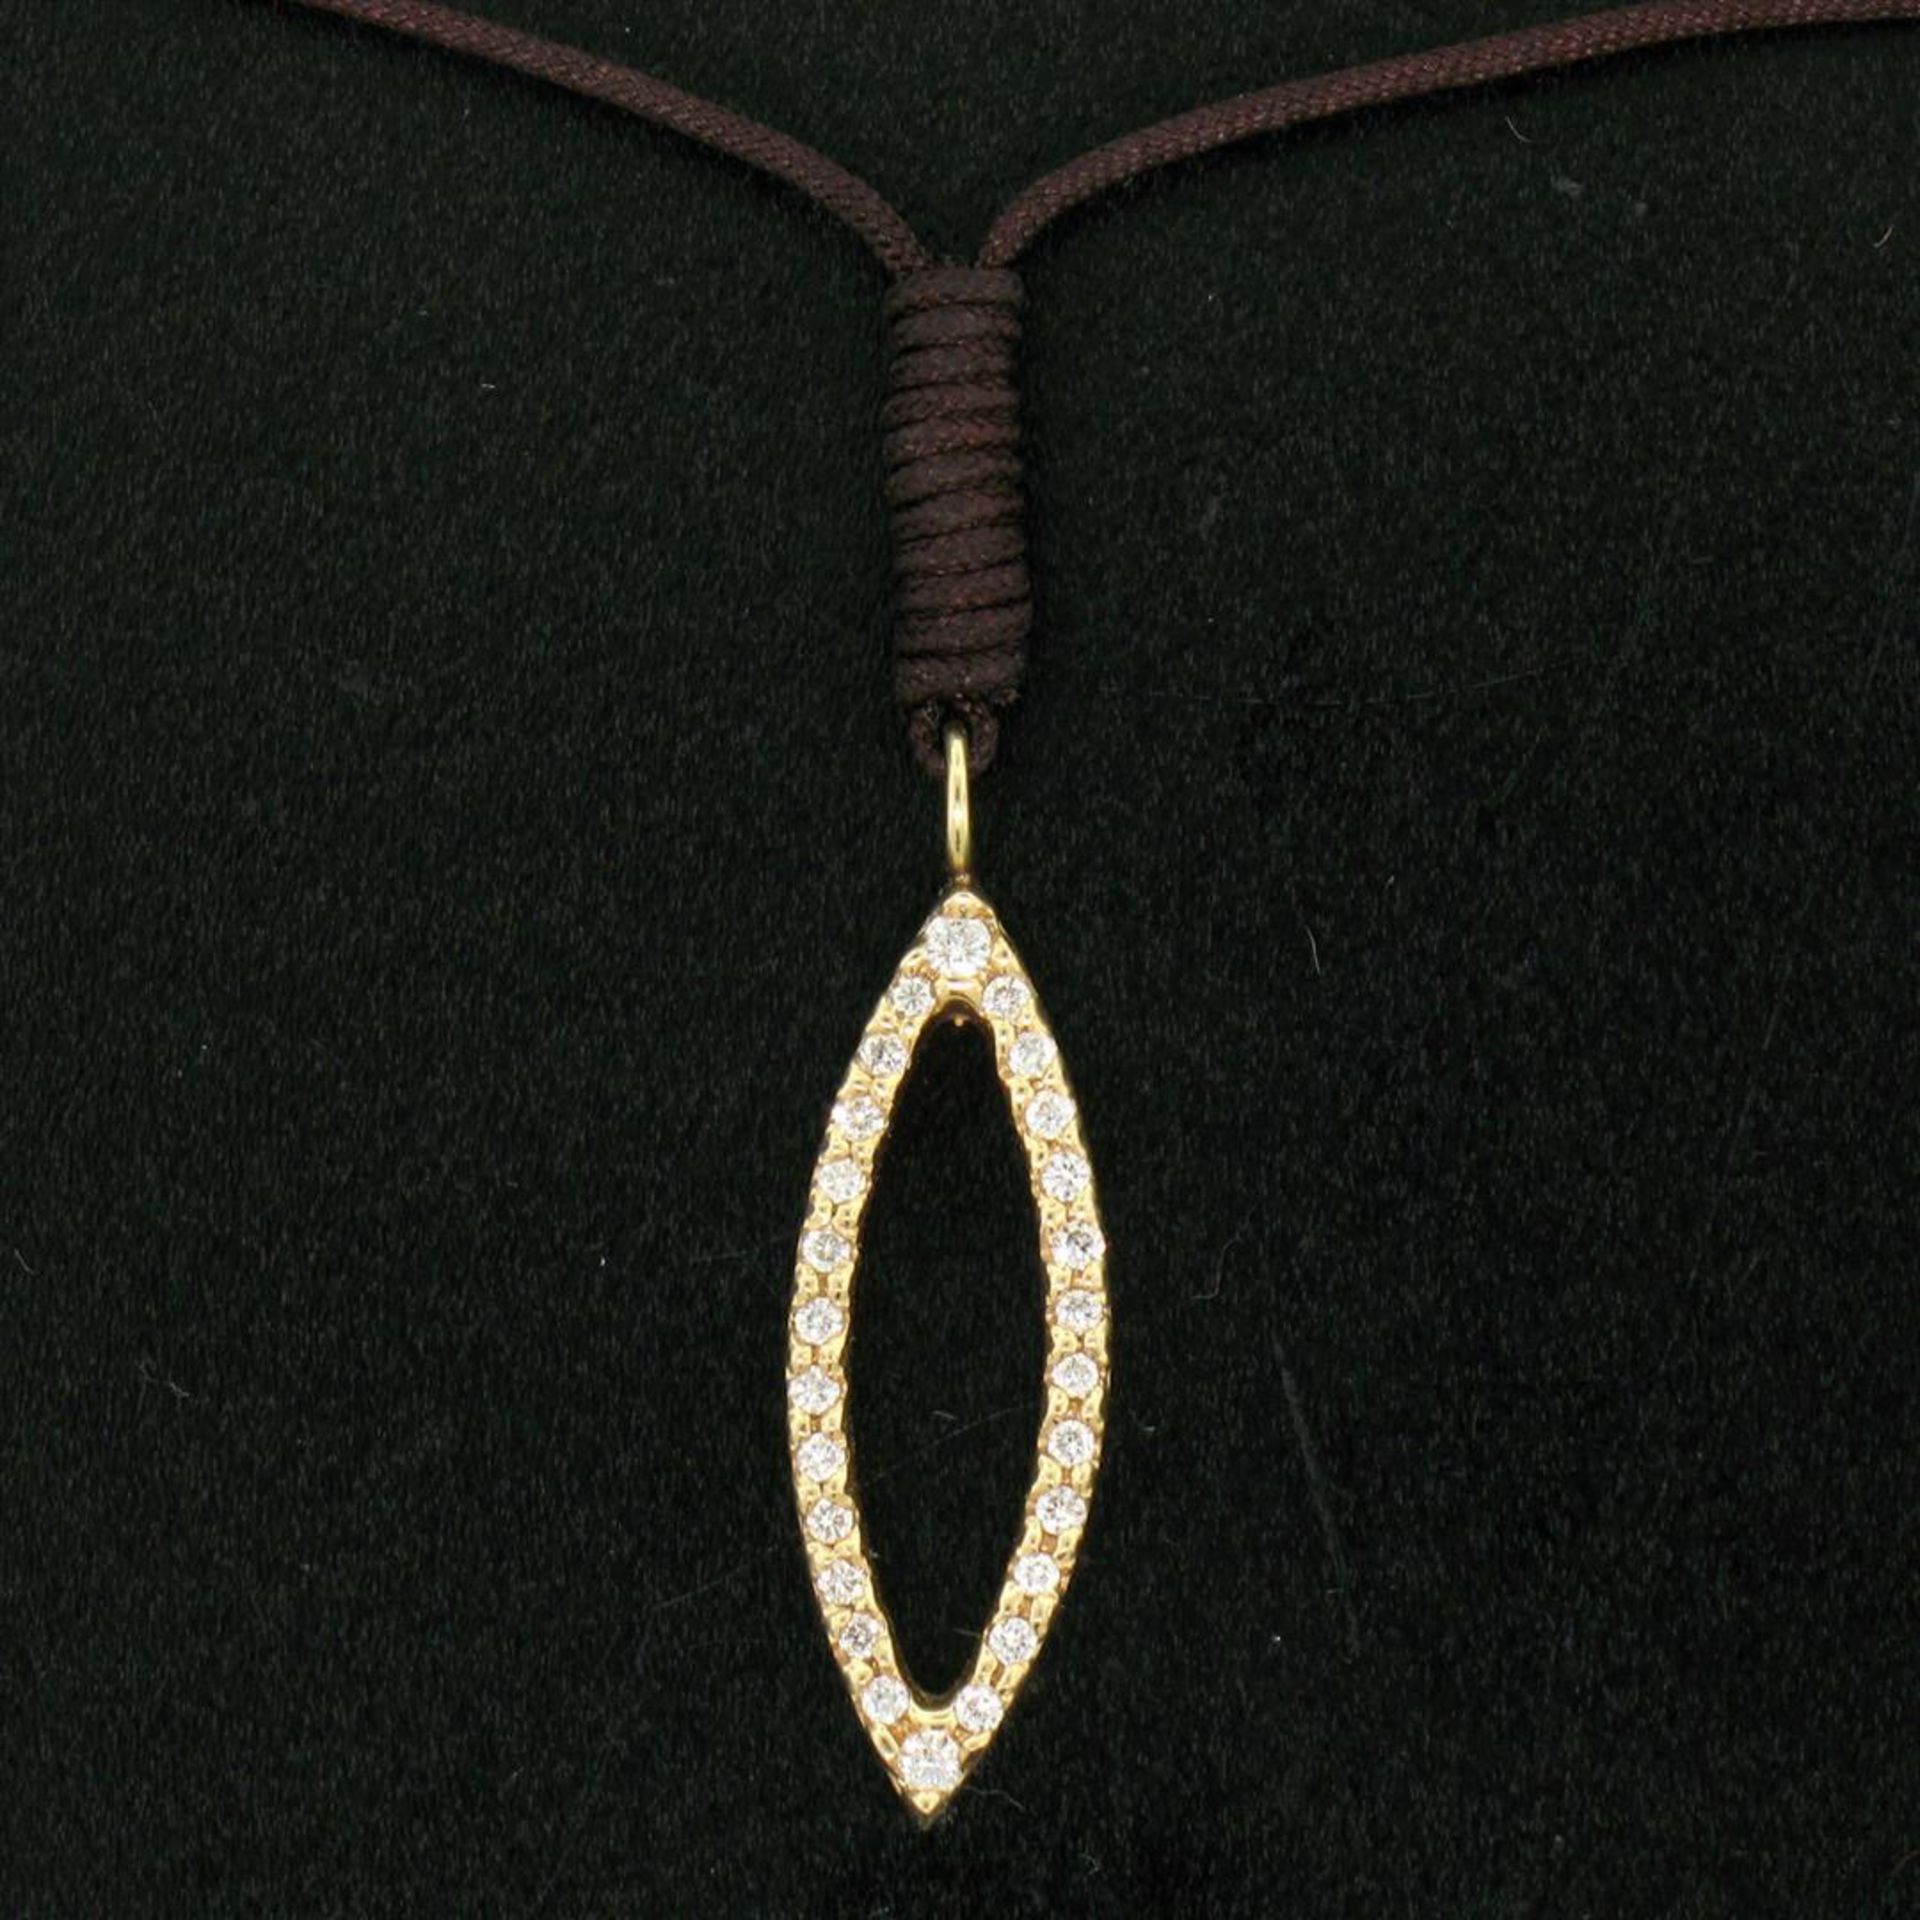 14k Rose Gold 0.30 ctw Diamond Marquise Pendant Necklace w/ 16" Brown Cord - Image 3 of 7